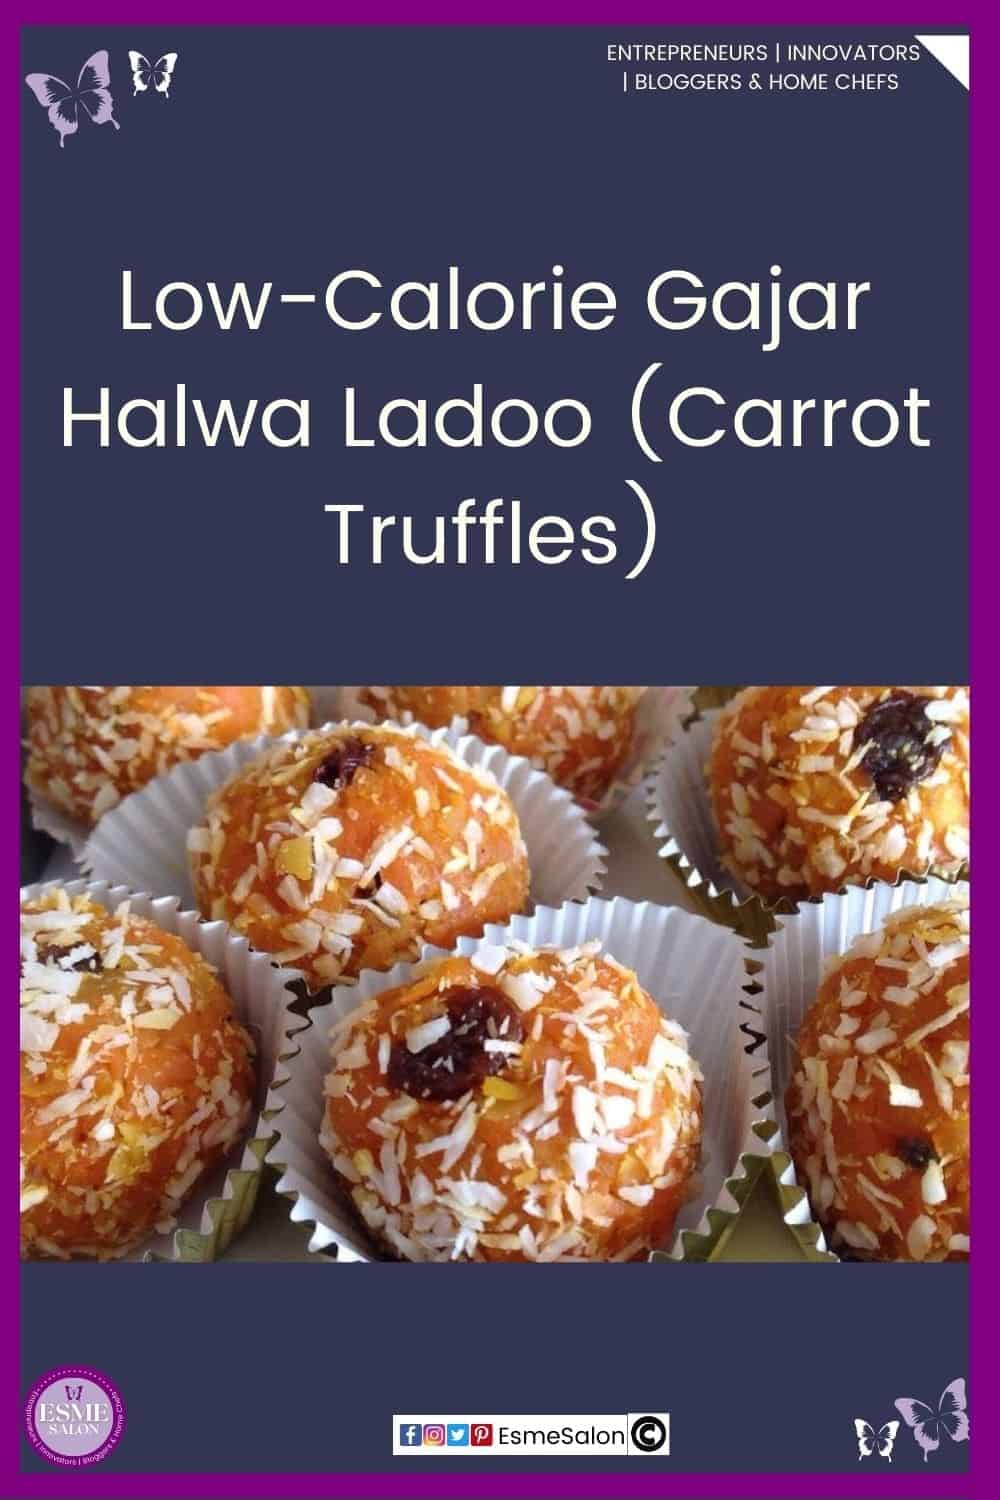 an image of balls of Gajar Halwa Ladoo (Carrot Truffles) covered in coconut